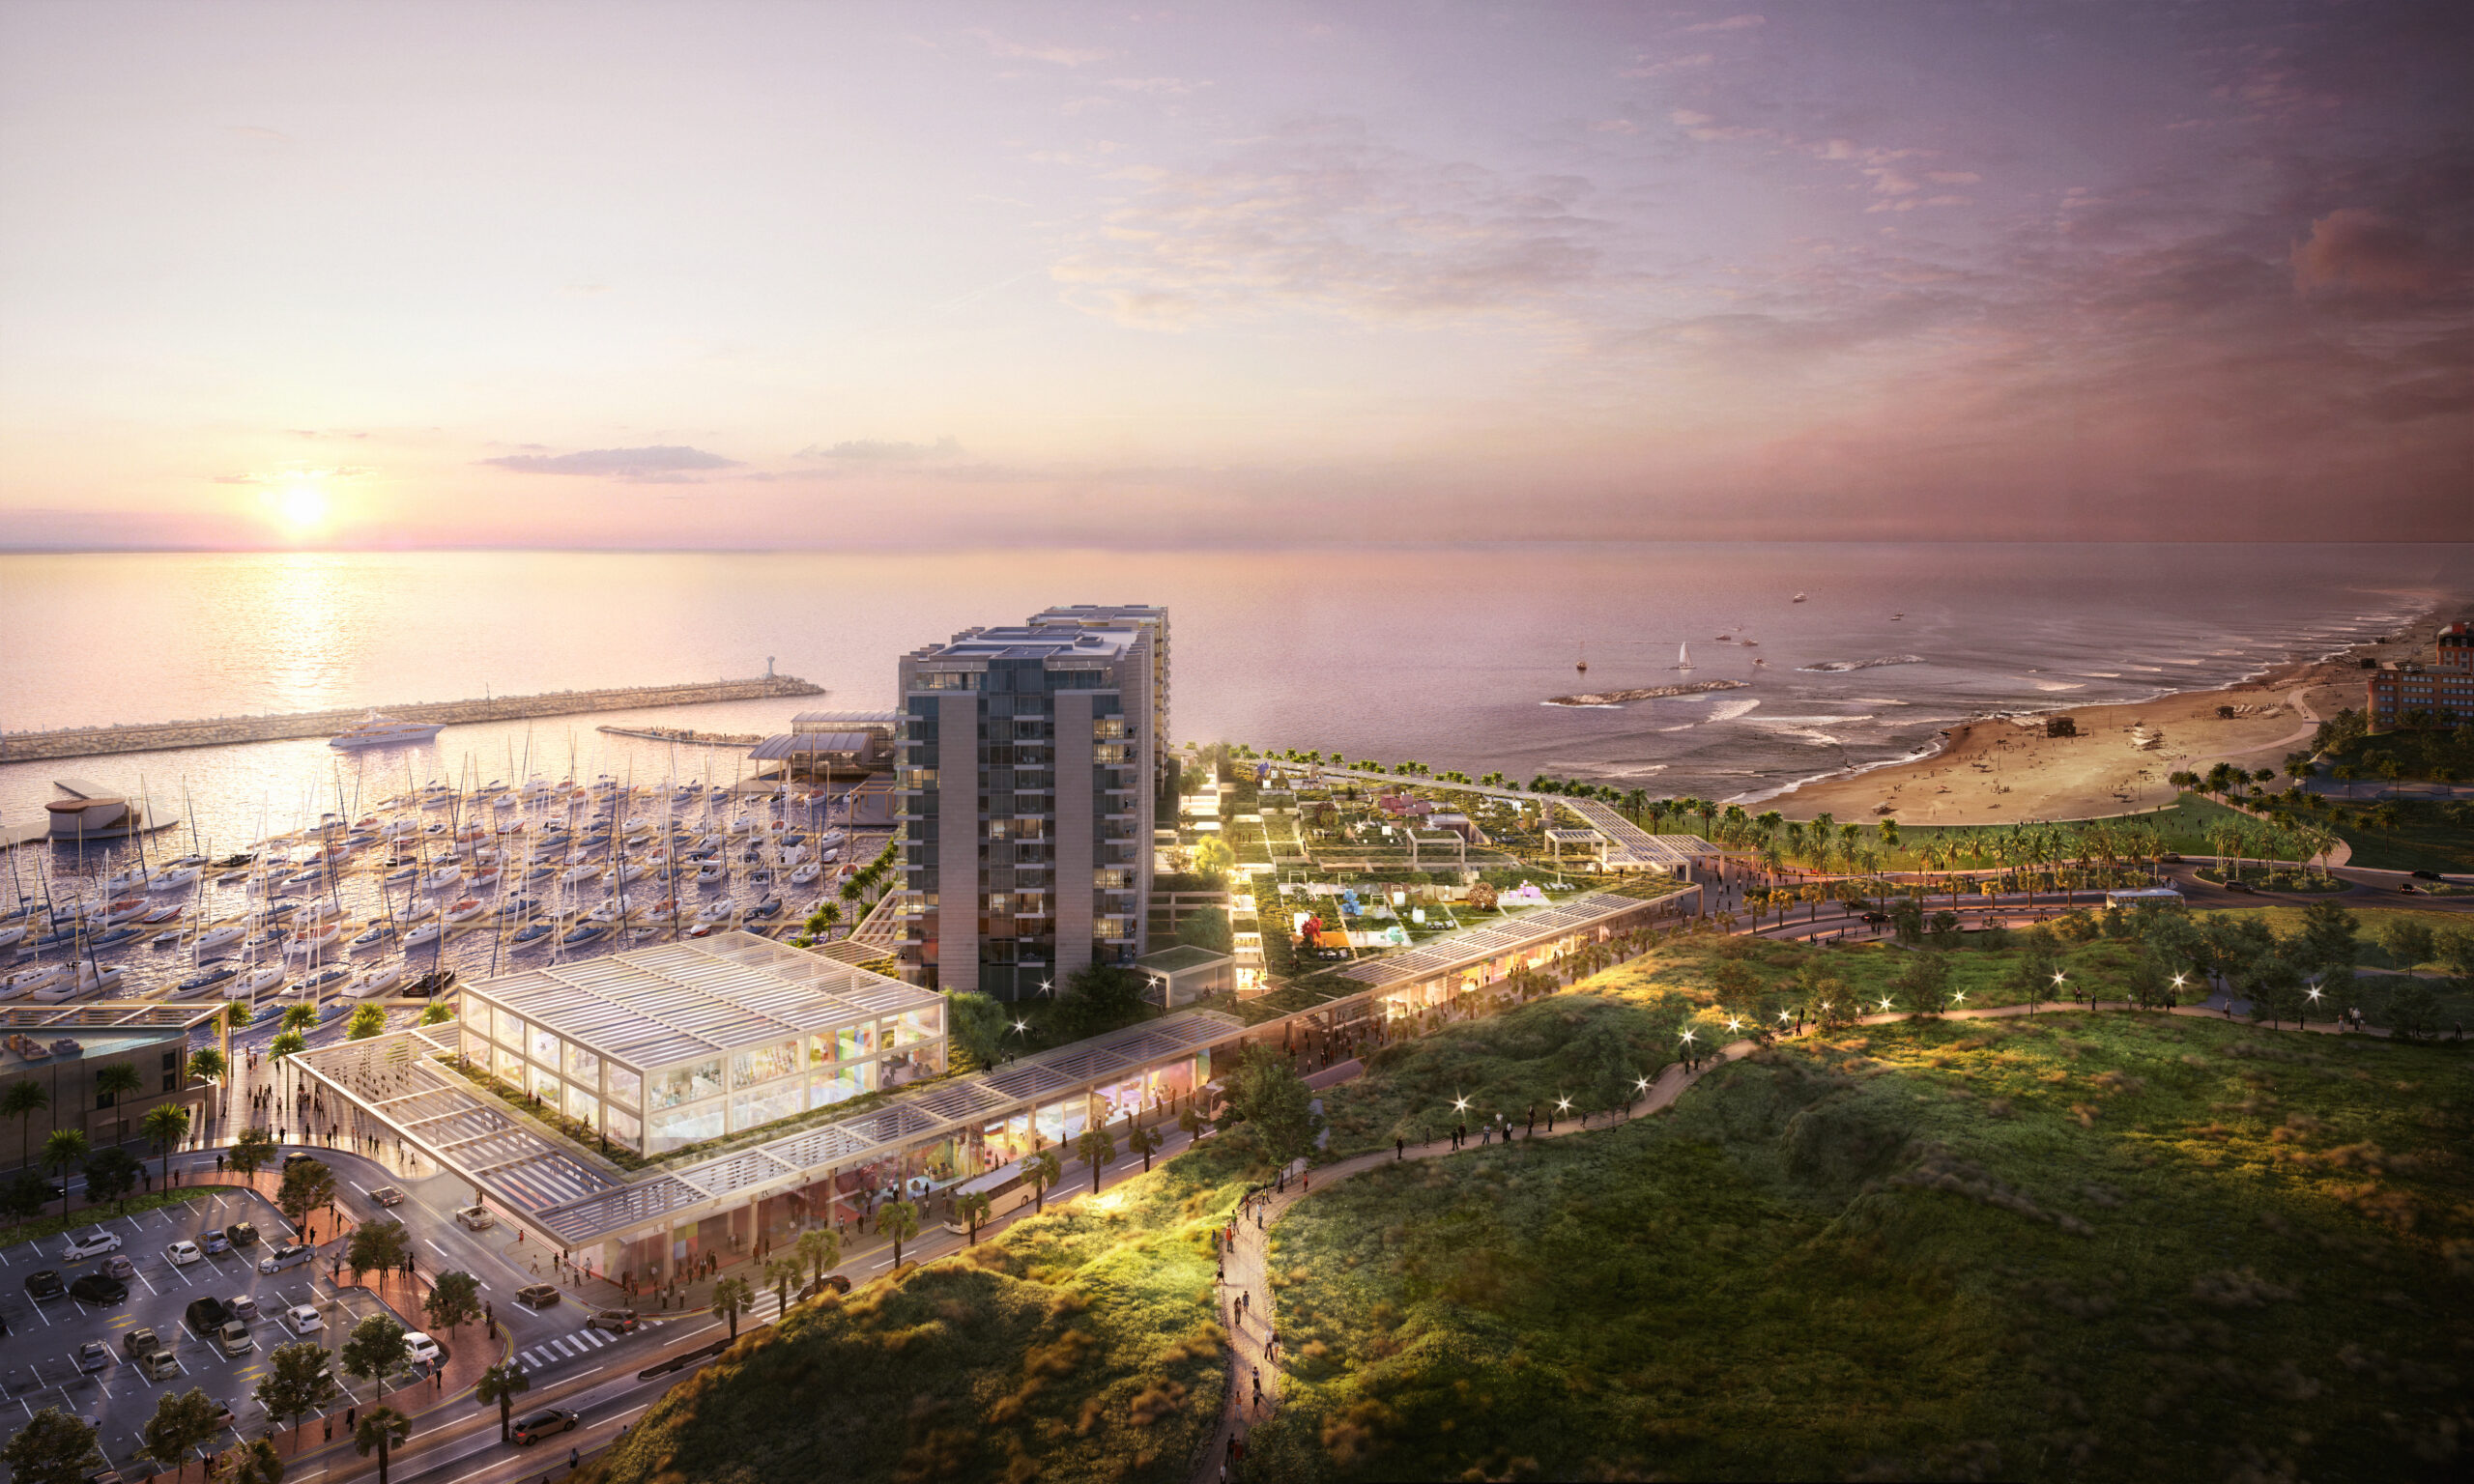 Arena: Preview of the mixed-use development transforming the Arena Mall is into a leisure, culture, and entertainment destination | Reality the Leading Group of Real Estate Investment Funds in Israel